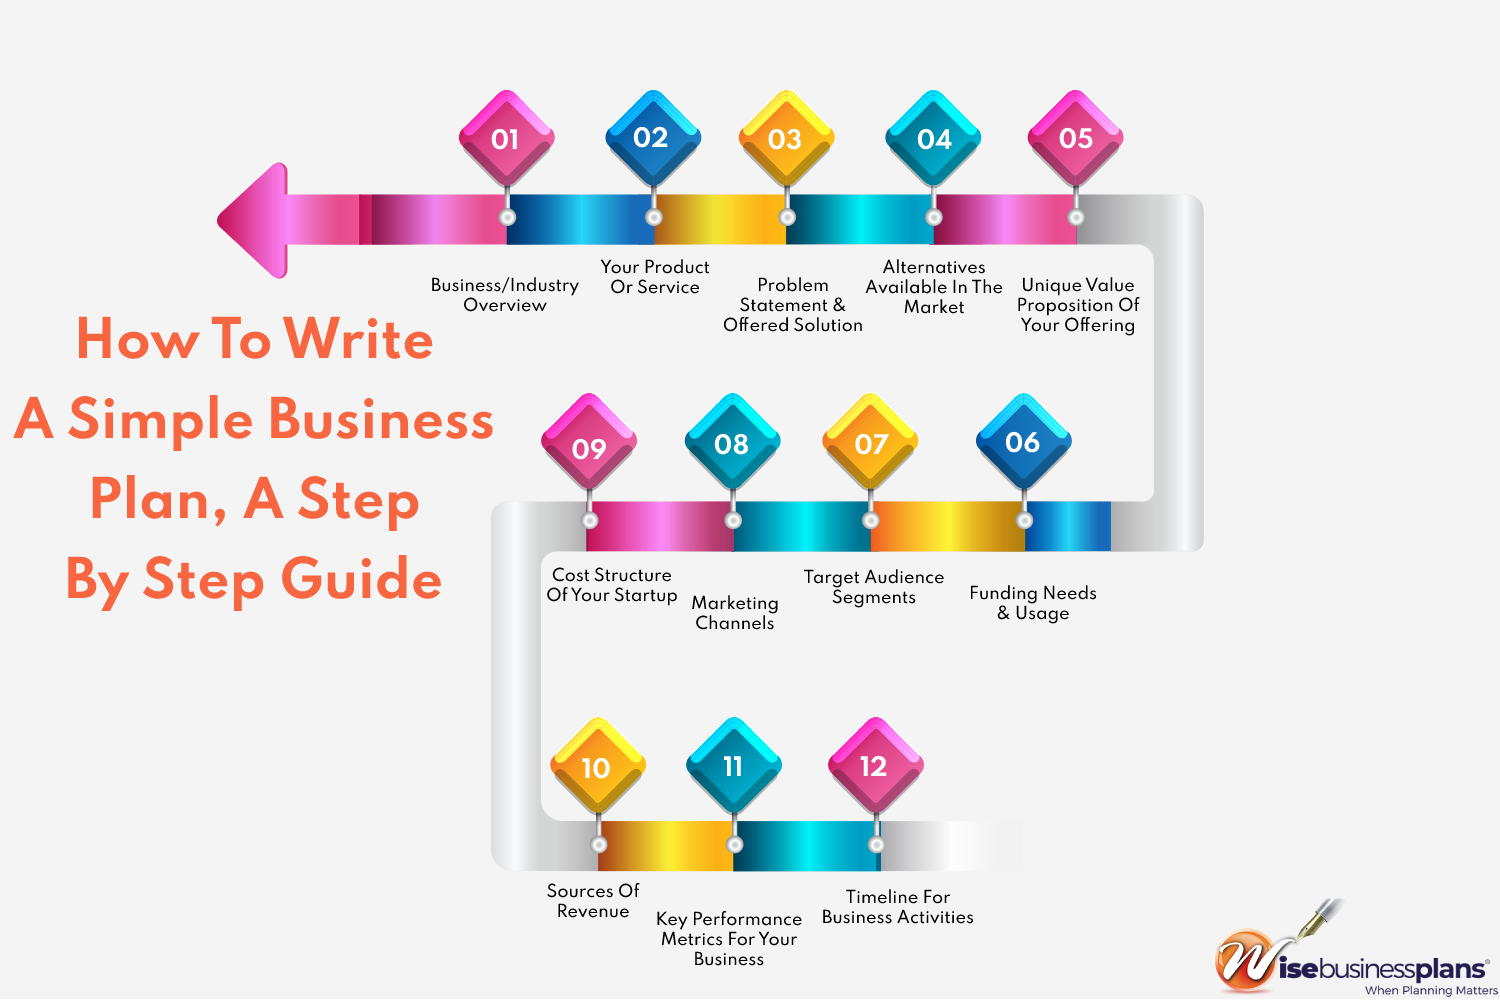 How to Write a Simple Business plan a Step By Step Guide